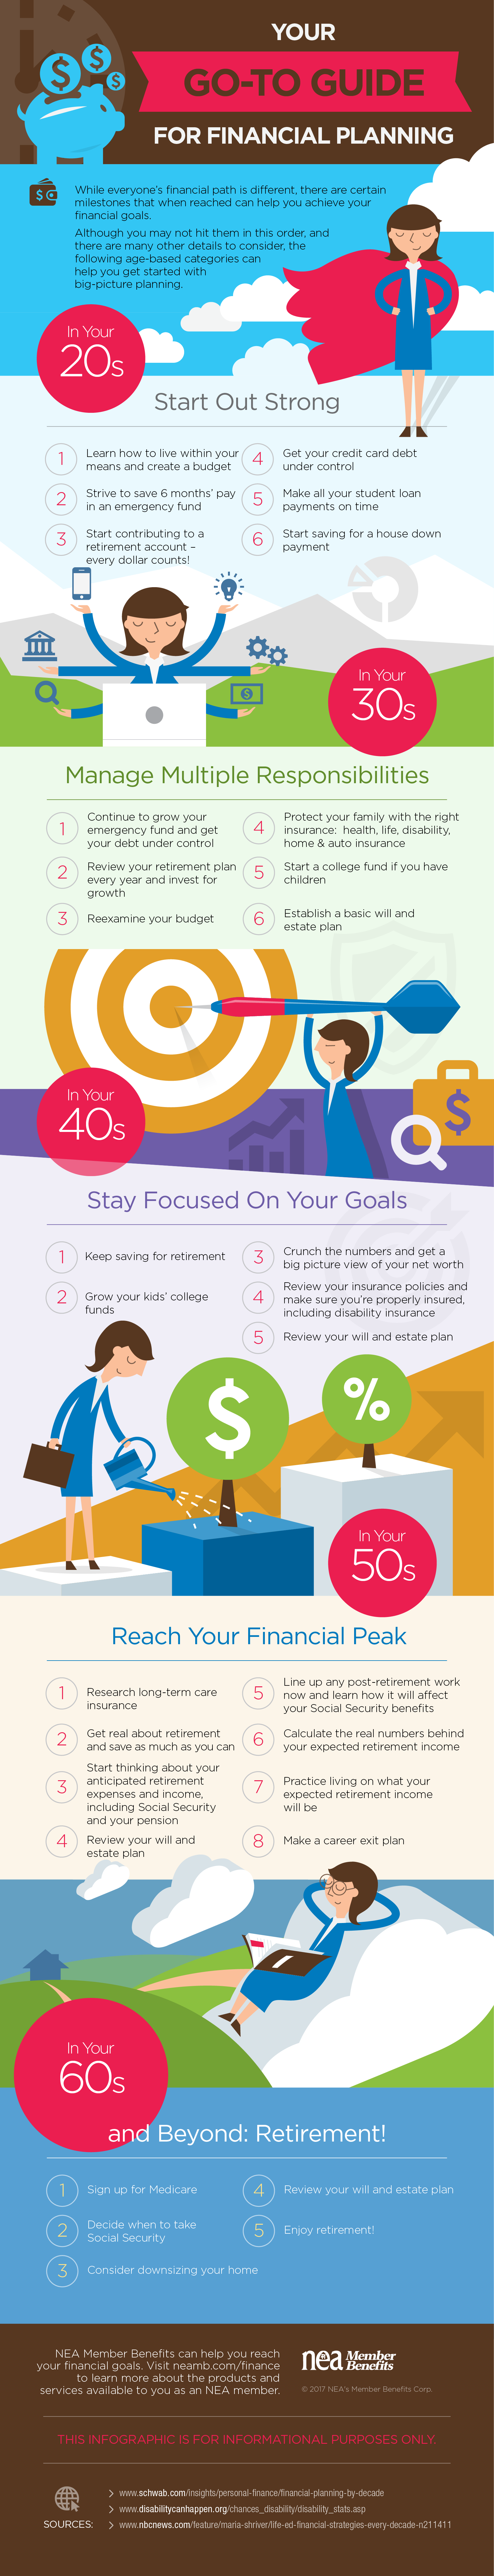 Infographic for Financial Planning